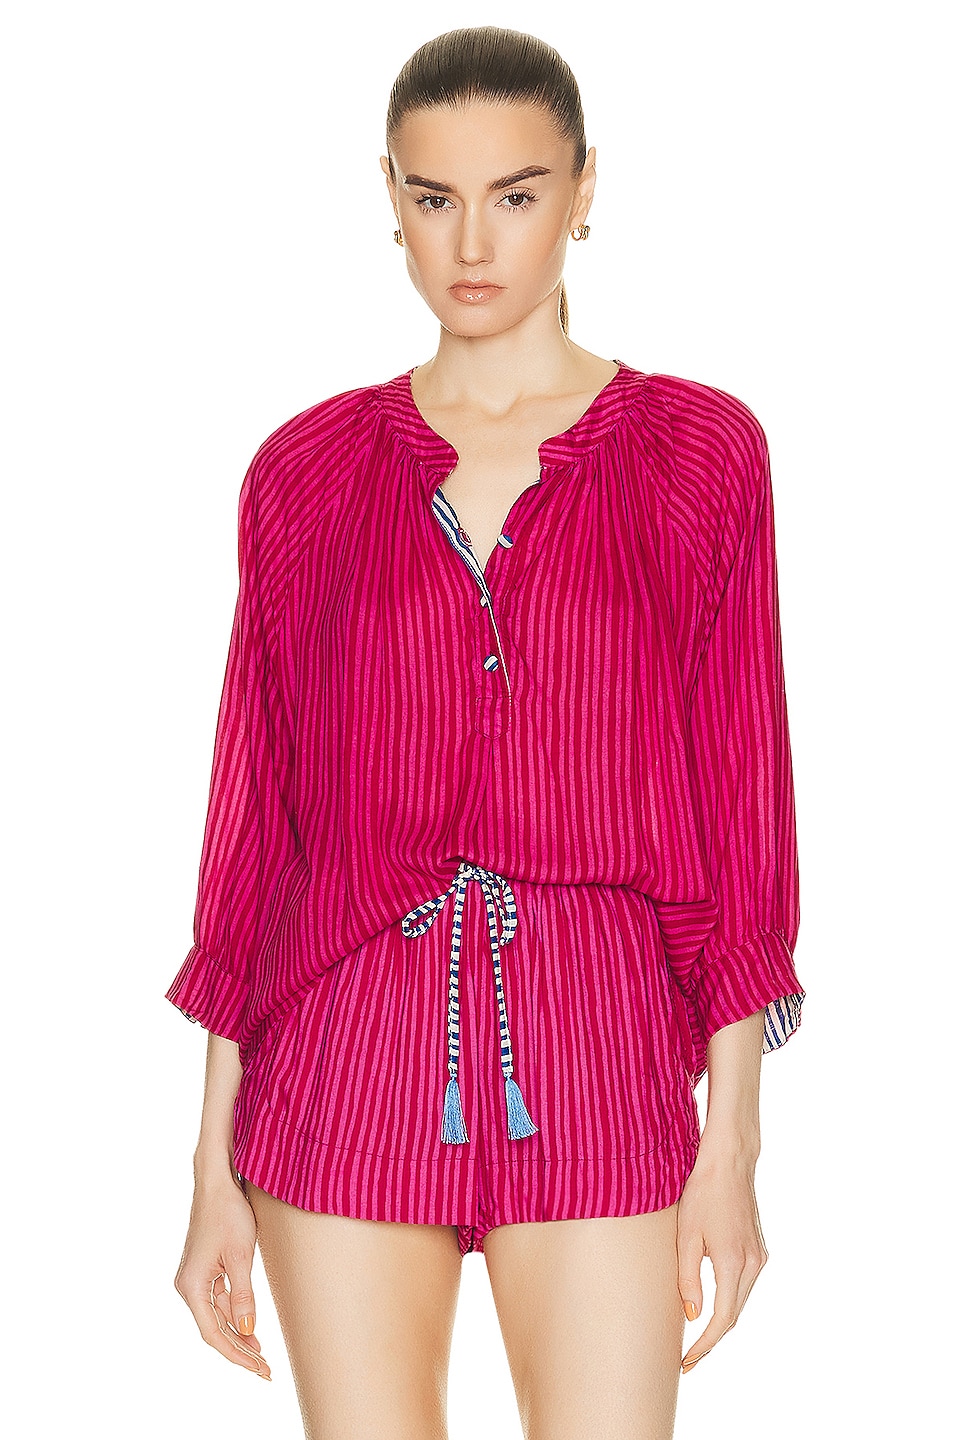 Image 1 of Natalie Martin Remy Top in Painted Stripe Fuchsia